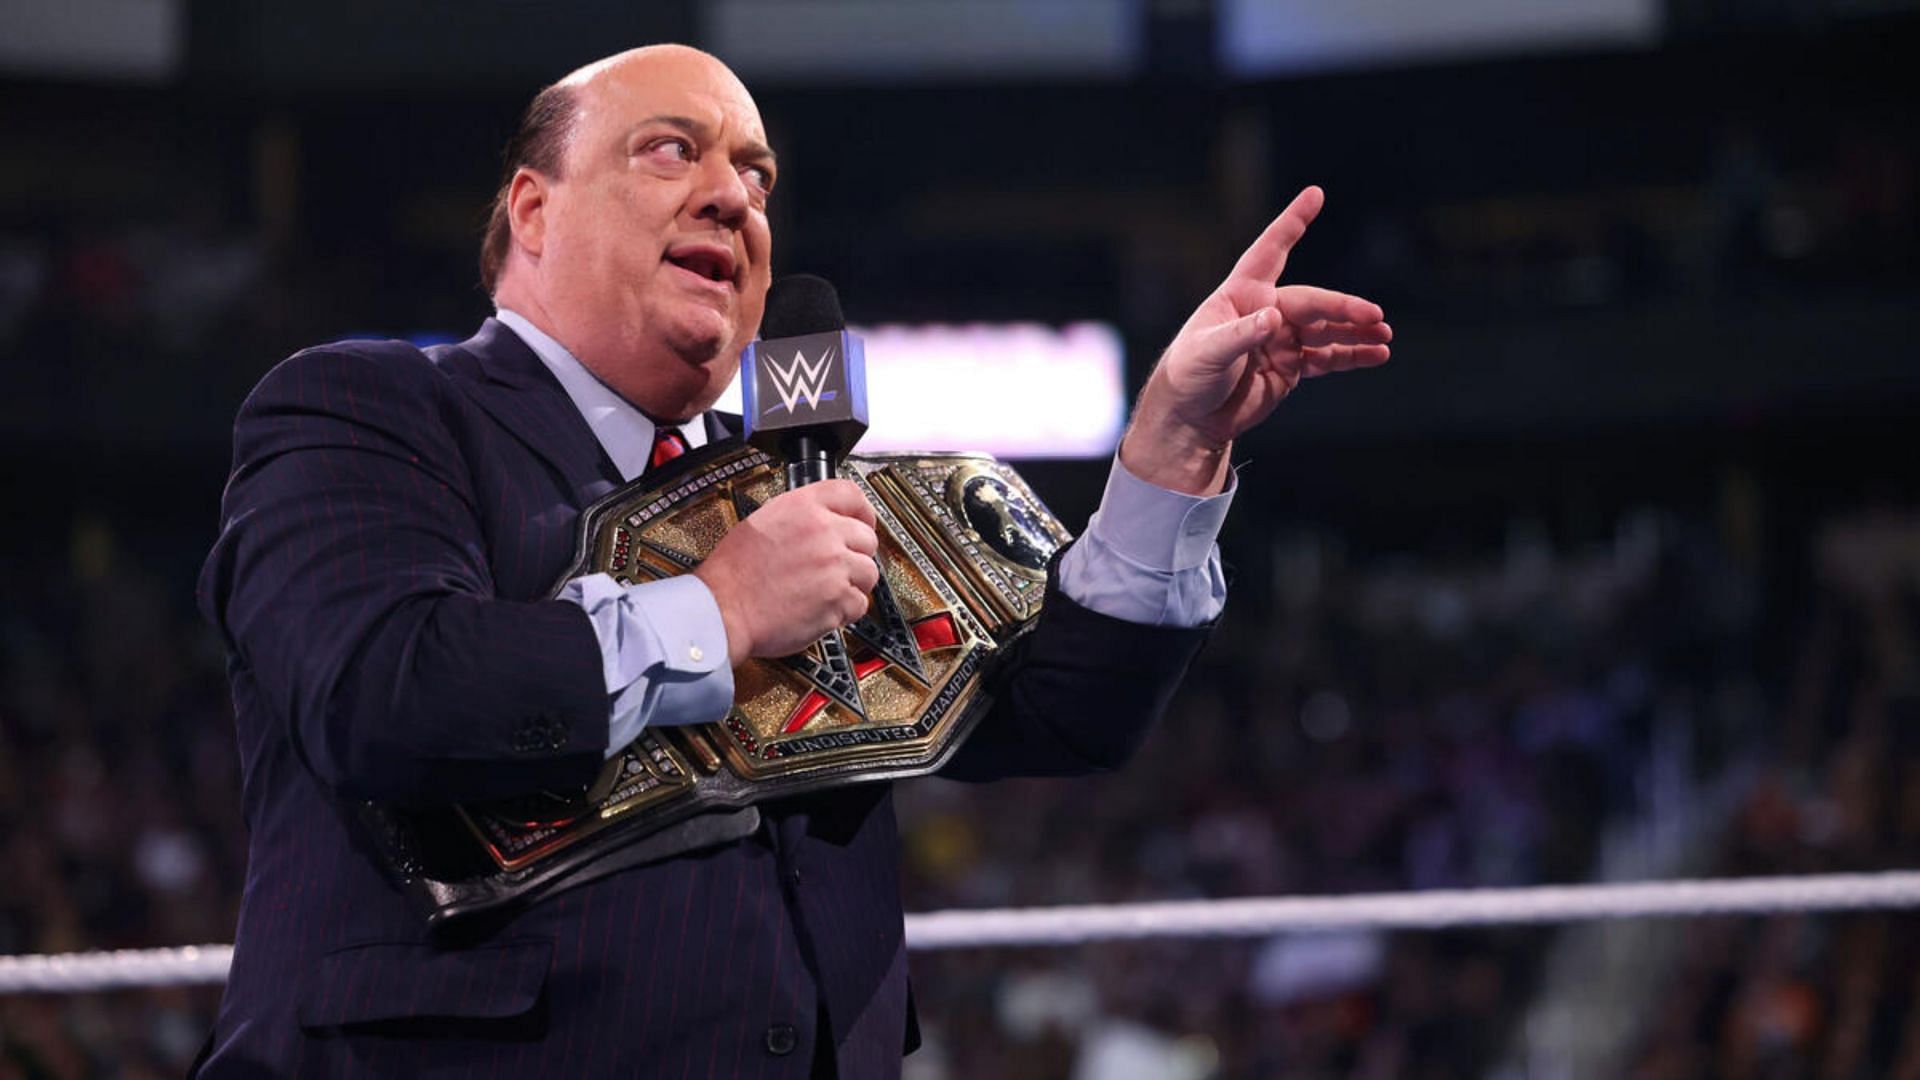 Paul Heyman will be inducted into the WWE Hall of Fame